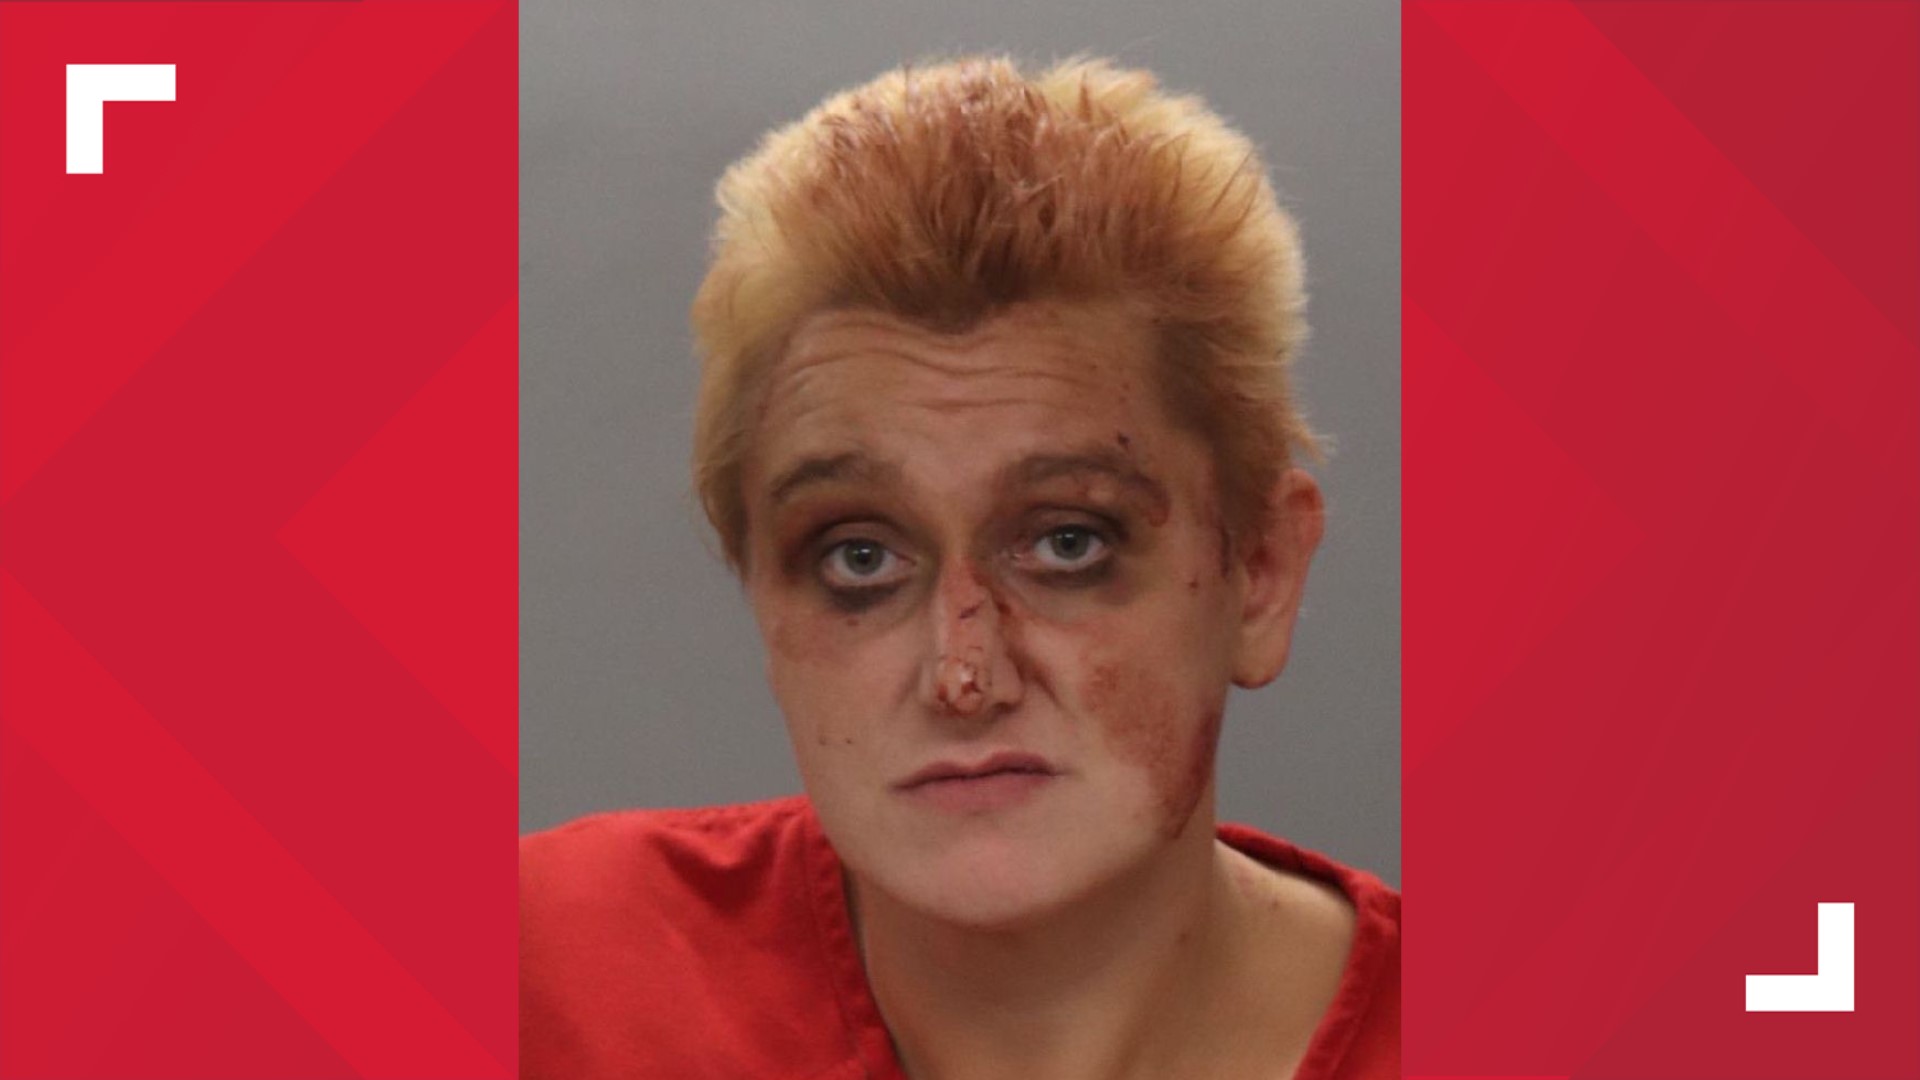 Tesia Taylor was charged with aggravated assault, carjacking, criminal trespassing, reckless driving and vandalism with additional charges possibly pending.